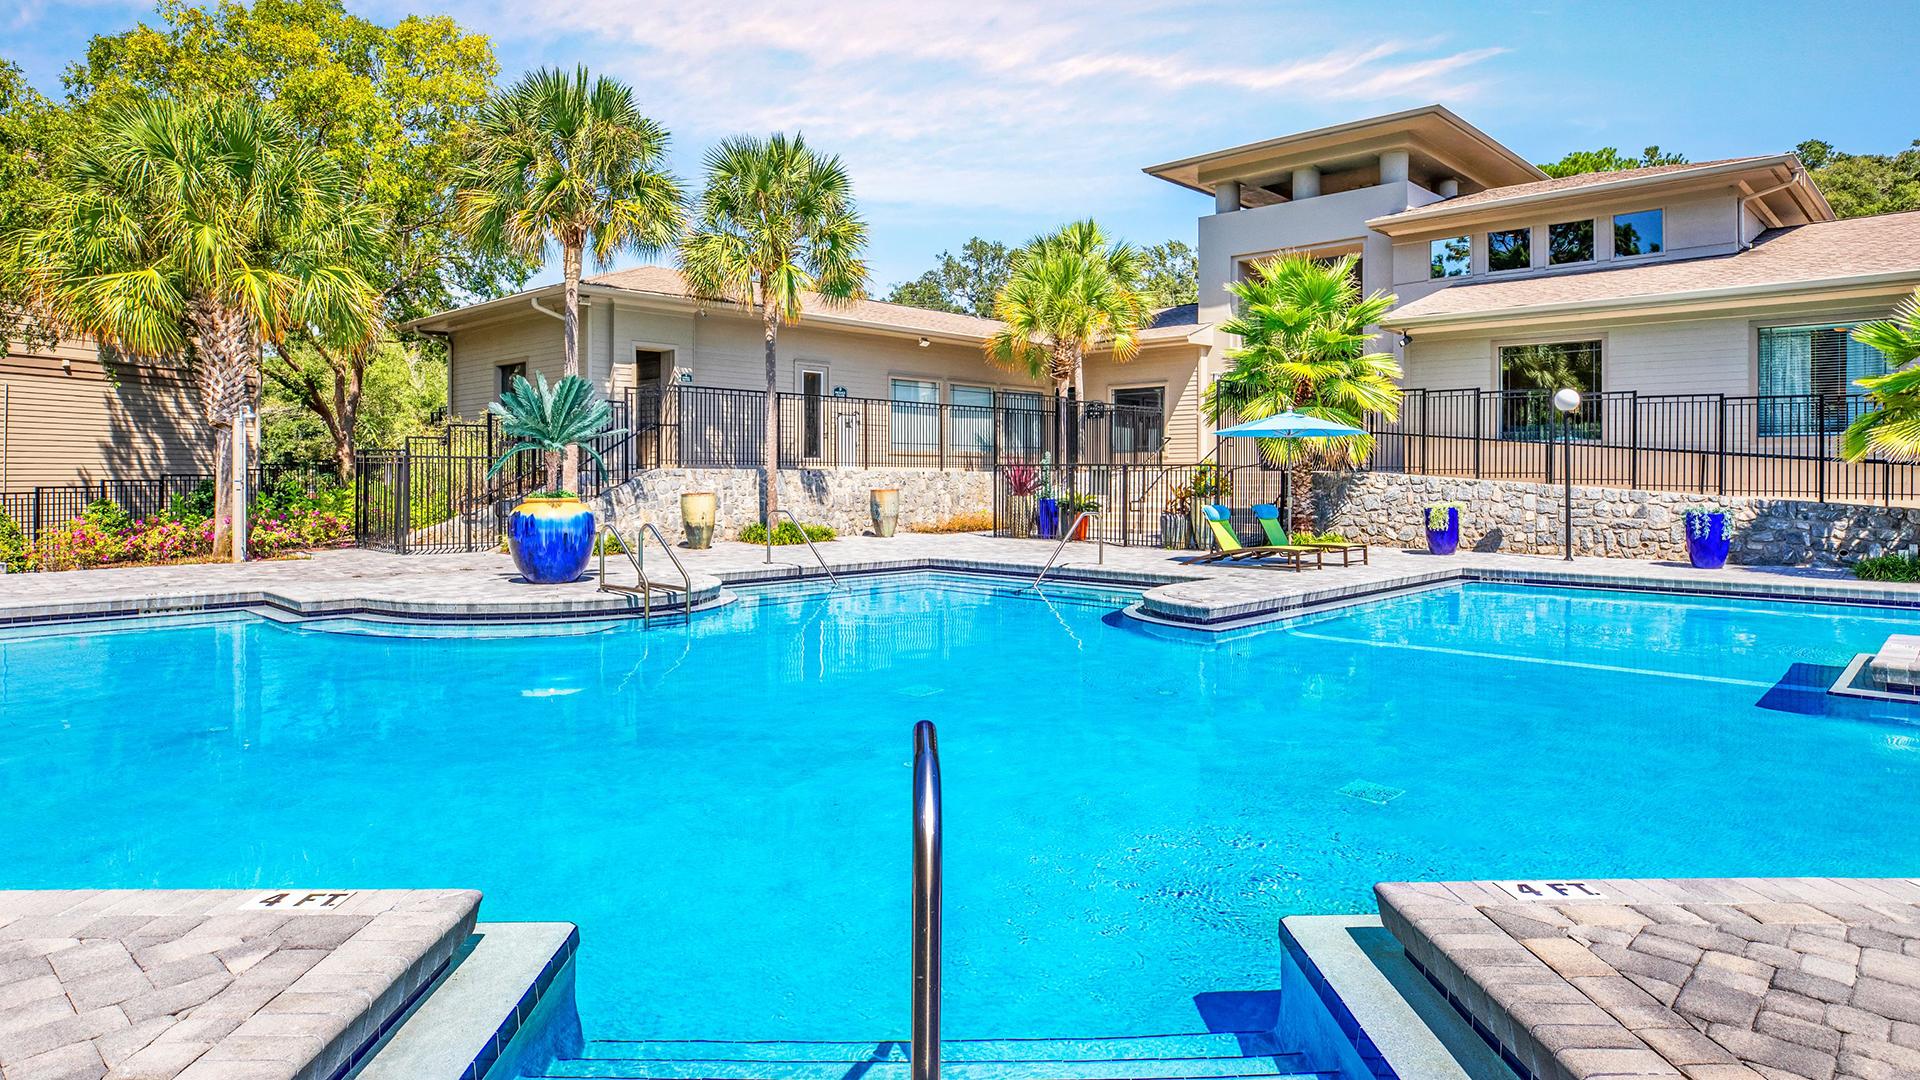 Welcome to Canyon Park Apartments at Tallahassee, Florida